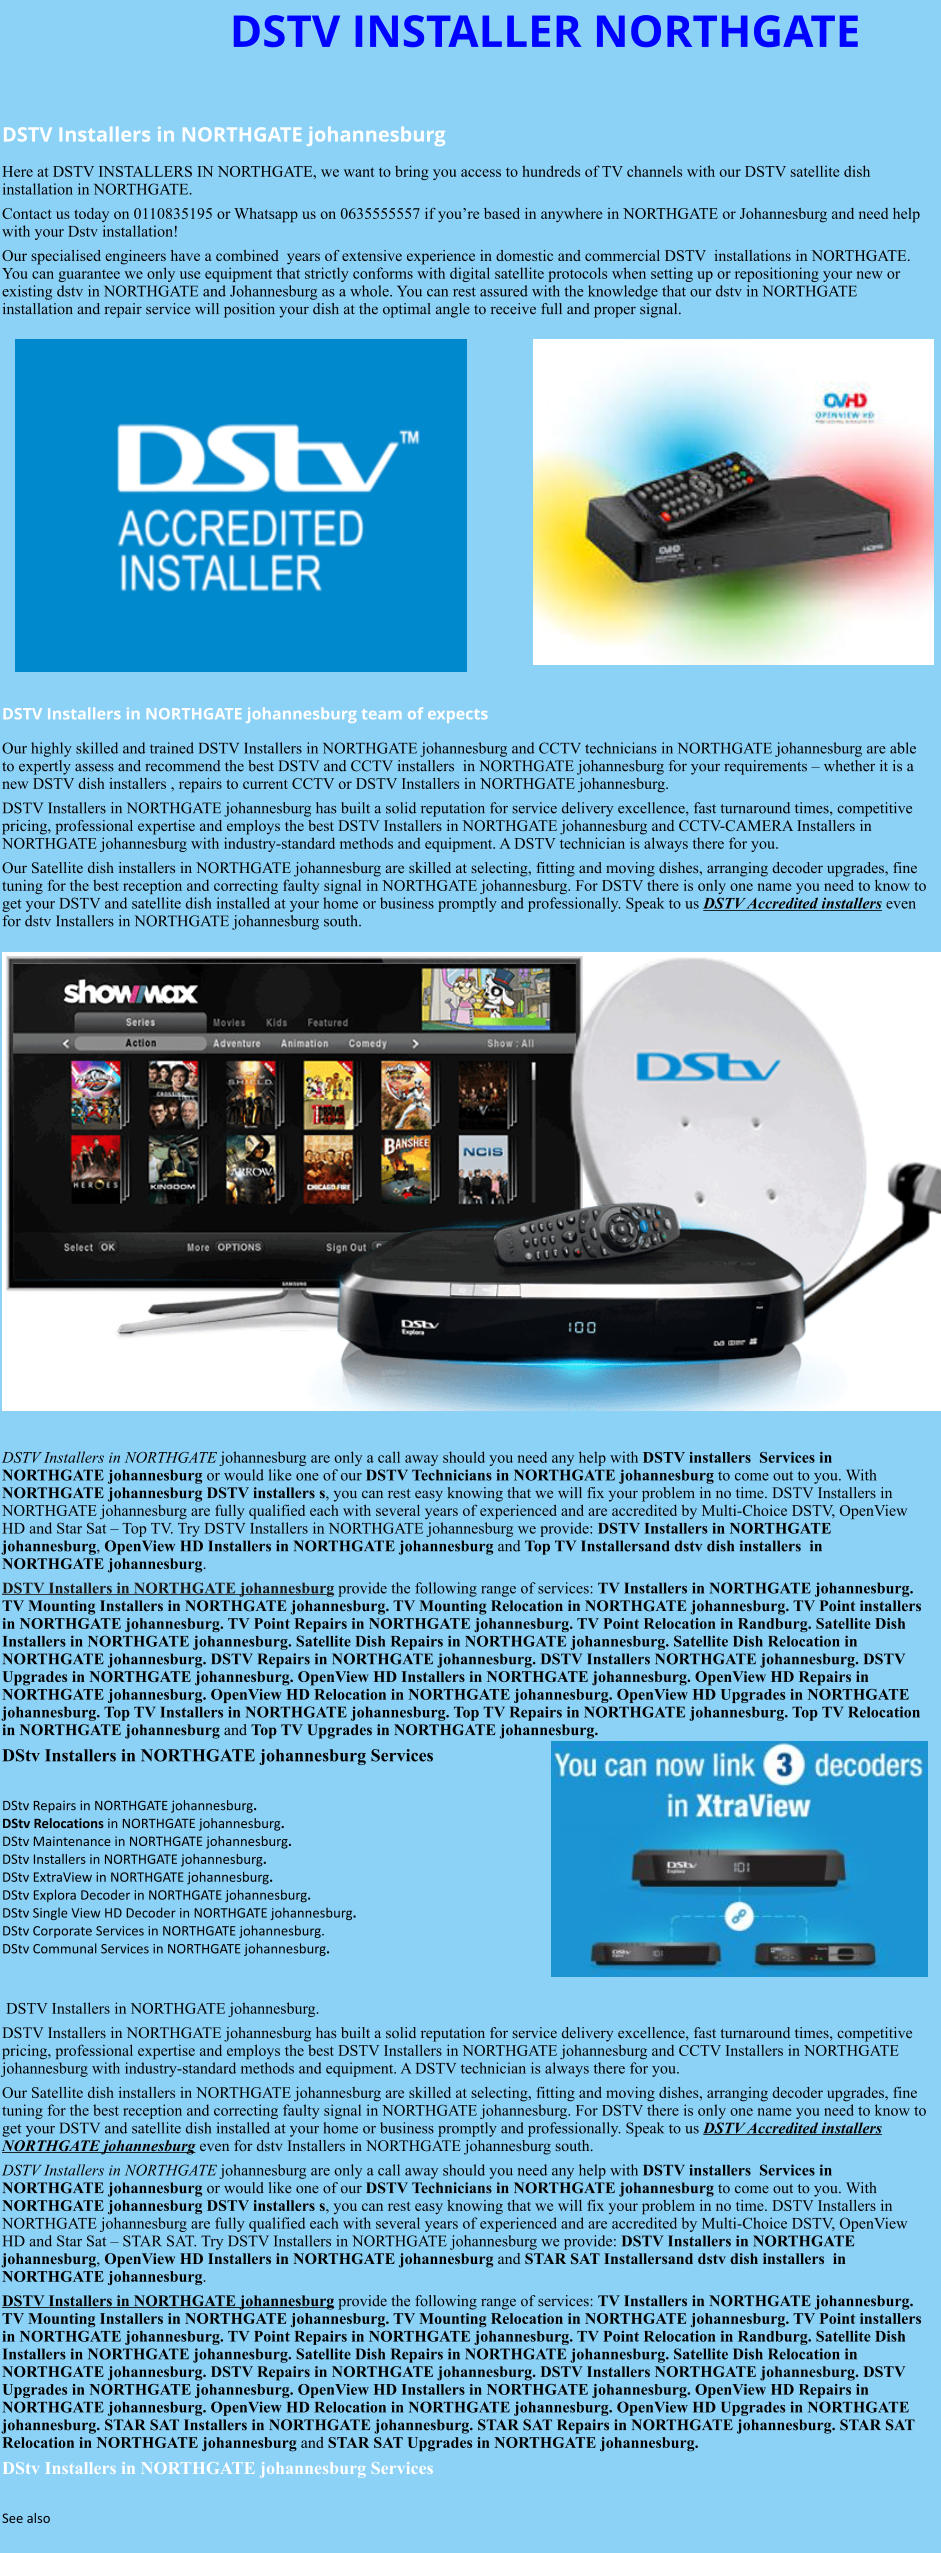 DSTV INSTALLER NORTHGATE  DSTV Installers in NORTHGATE johannesburg  Here at DSTV INSTALLERS IN NORTHGATE, we want to bring you access to hundreds of TV channels with our DSTV satellite dish installation in NORTHGATE. Contact us today on 0110835195 or Whatsapp us on 0635555557 if you’re based in anywhere in NORTHGATE or Johannesburg and need help with your Dstv installation! Our specialised engineers have a combined  years of extensive experience in domestic and commercial DSTV  installations in NORTHGATE. You can guarantee we only use equipment that strictly conforms with digital satellite protocols when setting up or repositioning your new or existing dstv in NORTHGATE and Johannesburg as a whole. You can rest assured with the knowledge that our dstv in NORTHGATE installation and repair service will position your dish at the optimal angle to receive full and proper signal.                DSTV Installers in NORTHGATE johannesburg team of expects Our highly skilled and trained DSTV Installers in NORTHGATE johannesburg and CCTV technicians in NORTHGATE johannesburg are able to expertly assess and recommend the best DSTV and CCTV installers  in NORTHGATE johannesburg for your requirements – whether it is a new DSTV dish installers , repairs to current CCTV or DSTV Installers in NORTHGATE johannesburg. DSTV Installers in NORTHGATE johannesburg has built a solid reputation for service delivery excellence, fast turnaround times, competitive pricing, professional expertise and employs the best DSTV Installers in NORTHGATE johannesburg and CCTV-CAMERA Installers in NORTHGATE johannesburg with industry-standard methods and equipment. A DSTV technician is always there for you. Our Satellite dish installers in NORTHGATE johannesburg are skilled at selecting, fitting and moving dishes, arranging decoder upgrades, fine tuning for the best reception and correcting faulty signal in NORTHGATE johannesburg. For DSTV there is only one name you need to know to get your DSTV and satellite dish installed at your home or business promptly and professionally. Speak to us DSTV Accredited installers even for dstv Installers in NORTHGATE johannesburg south.                      DSTV Installers in NORTHGATE johannesburg are only a call away should you need any help with DSTV installers  Services in NORTHGATE johannesburg or would like one of our DSTV Technicians in NORTHGATE johannesburg to come out to you. With NORTHGATE johannesburg DSTV installers s, you can rest easy knowing that we will fix your problem in no time. DSTV Installers in NORTHGATE johannesburg are fully qualified each with several years of experienced and are accredited by Multi-Choice DSTV, OpenView HD and Star Sat – Top TV. Try DSTV Installers in NORTHGATE johannesburg we provide: DSTV Installers in NORTHGATE johannesburg, OpenView HD Installers in NORTHGATE johannesburg and Top TV Installersand dstv dish installers  in NORTHGATE johannesburg. DSTV Installers in NORTHGATE johannesburg provide the following range of services: TV Installers in NORTHGATE johannesburg. TV Mounting Installers in NORTHGATE johannesburg. TV Mounting Relocation in NORTHGATE johannesburg. TV Point installers  in NORTHGATE johannesburg. TV Point Repairs in NORTHGATE johannesburg. TV Point Relocation in Randburg. Satellite Dish Installers in NORTHGATE johannesburg. Satellite Dish Repairs in NORTHGATE johannesburg. Satellite Dish Relocation in NORTHGATE johannesburg. DSTV Repairs in NORTHGATE johannesburg. DSTV Installers NORTHGATE johannesburg. DSTV Upgrades in NORTHGATE johannesburg. OpenView HD Installers in NORTHGATE johannesburg. OpenView HD Repairs in NORTHGATE johannesburg. OpenView HD Relocation in NORTHGATE johannesburg. OpenView HD Upgrades in NORTHGATE johannesburg. Top TV Installers in NORTHGATE johannesburg. Top TV Repairs in NORTHGATE johannesburg. Top TV Relocation in NORTHGATE johannesburg and Top TV Upgrades in NORTHGATE johannesburg. DStv Installers in NORTHGATE johannesburg Services  DStv Repairs in NORTHGATE johannesburg.  DStv Relocations in NORTHGATE johannesburg.  DStv Maintenance in NORTHGATE johannesburg. DStv Installers in NORTHGATE johannesburg. DStv ExtraView in NORTHGATE johannesburg. DStv Explora Decoder in NORTHGATE johannesburg. DStv Single View HD Decoder in NORTHGATE johannesburg. DStv Corporate Services in NORTHGATE johannesburg. DStv Communal Services in NORTHGATE johannesburg.    DSTV Installers in NORTHGATE johannesburg. DSTV Installers in NORTHGATE johannesburg has built a solid reputation for service delivery excellence, fast turnaround times, competitive pricing, professional expertise and employs the best DSTV Installers in NORTHGATE johannesburg and CCTV Installers in NORTHGATE johannesburg with industry-standard methods and equipment. A DSTV technician is always there for you. Our Satellite dish installers in NORTHGATE johannesburg are skilled at selecting, fitting and moving dishes, arranging decoder upgrades, fine tuning for the best reception and correcting faulty signal in NORTHGATE johannesburg. For DSTV there is only one name you need to know to get your DSTV and satellite dish installed at your home or business promptly and professionally. Speak to us DSTV Accredited installers NORTHGATE johannesburg even for dstv Installers in NORTHGATE johannesburg south. DSTV Installers in NORTHGATE johannesburg are only a call away should you need any help with DSTV installers  Services in NORTHGATE johannesburg or would like one of our DSTV Technicians in NORTHGATE johannesburg to come out to you. With NORTHGATE johannesburg DSTV installers s, you can rest easy knowing that we will fix your problem in no time. DSTV Installers in NORTHGATE johannesburg are fully qualified each with several years of experienced and are accredited by Multi-Choice DSTV, OpenView HD and Star Sat – STAR SAT. Try DSTV Installers in NORTHGATE johannesburg we provide: DSTV Installers in NORTHGATE johannesburg, OpenView HD Installers in NORTHGATE johannesburg and STAR SAT Installersand dstv dish installers  in NORTHGATE johannesburg. DSTV Installers in NORTHGATE johannesburg provide the following range of services: TV Installers in NORTHGATE johannesburg. TV Mounting Installers in NORTHGATE johannesburg. TV Mounting Relocation in NORTHGATE johannesburg. TV Point installers  in NORTHGATE johannesburg. TV Point Repairs in NORTHGATE johannesburg. TV Point Relocation in Randburg. Satellite Dish Installers in NORTHGATE johannesburg. Satellite Dish Repairs in NORTHGATE johannesburg. Satellite Dish Relocation in NORTHGATE johannesburg. DSTV Repairs in NORTHGATE johannesburg. DSTV Installers NORTHGATE johannesburg. DSTV Upgrades in NORTHGATE johannesburg. OpenView HD Installers in NORTHGATE johannesburg. OpenView HD Repairs in NORTHGATE johannesburg. OpenView HD Relocation in NORTHGATE johannesburg. OpenView HD Upgrades in NORTHGATE johannesburg. STAR SAT Installers in NORTHGATE johannesburg. STAR SAT Repairs in NORTHGATE johannesburg. STAR SAT Relocation in NORTHGATE johannesburg and STAR SAT Upgrades in NORTHGATE johannesburg. DStv Installers in NORTHGATE johannesburg Services  See also